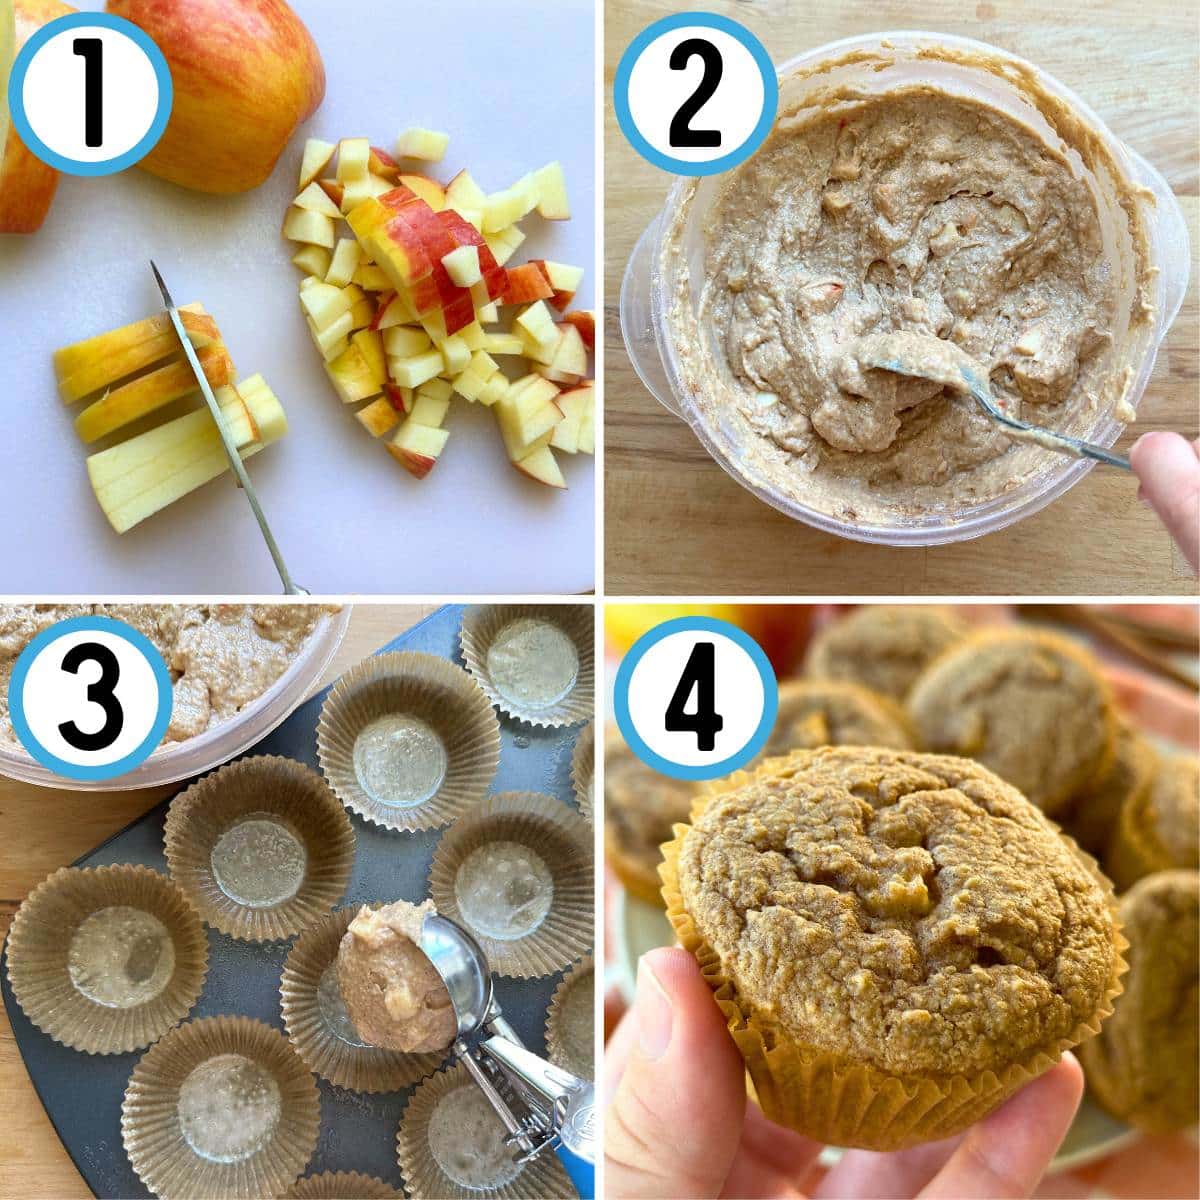 Step by step guide to making apple muffins. 1. Chop apples into small chunks. 2. Mix batter. 3. Scoop batter into muffin tin. 3. Bake until golden brown.